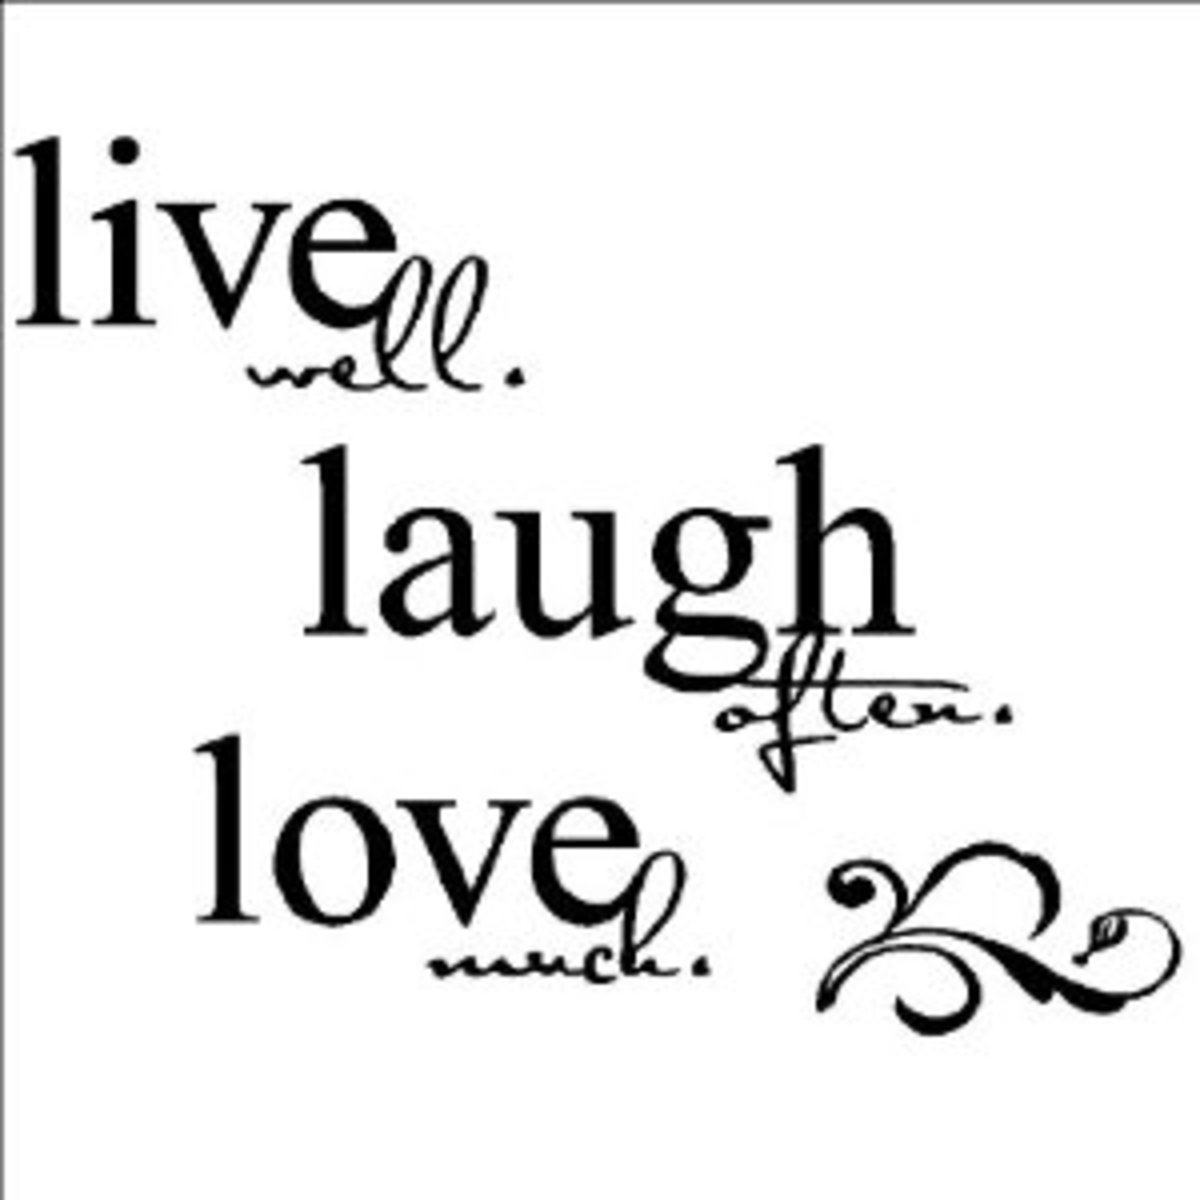 Live Laugh Love Wall Décor: From Wall Decals to Hanging Picture Frames |  hubpages